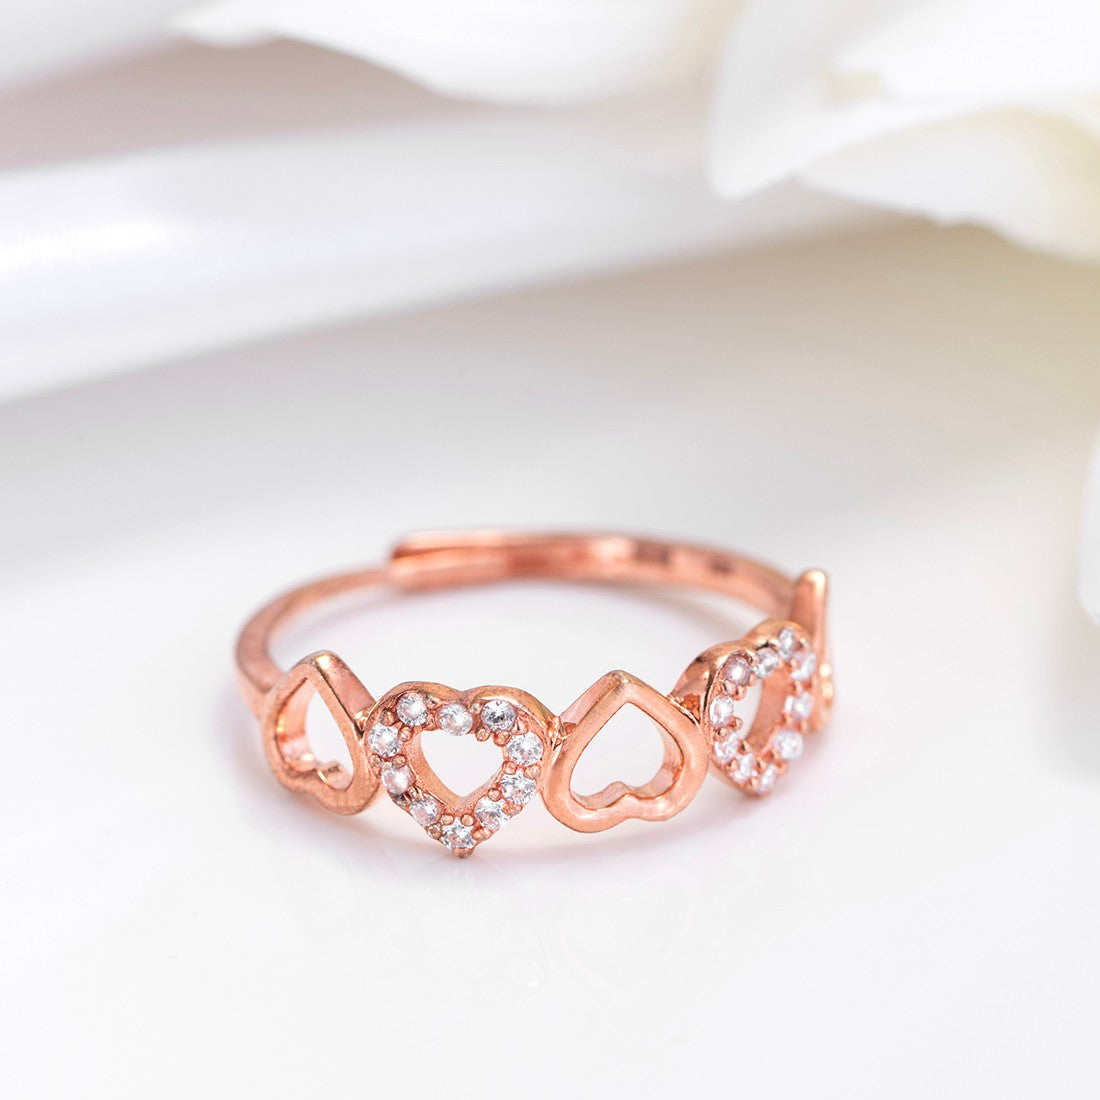 Heartfelt Charm Rose Gold Plated 925 Sterling Silver Women's Ring (Adjustable)